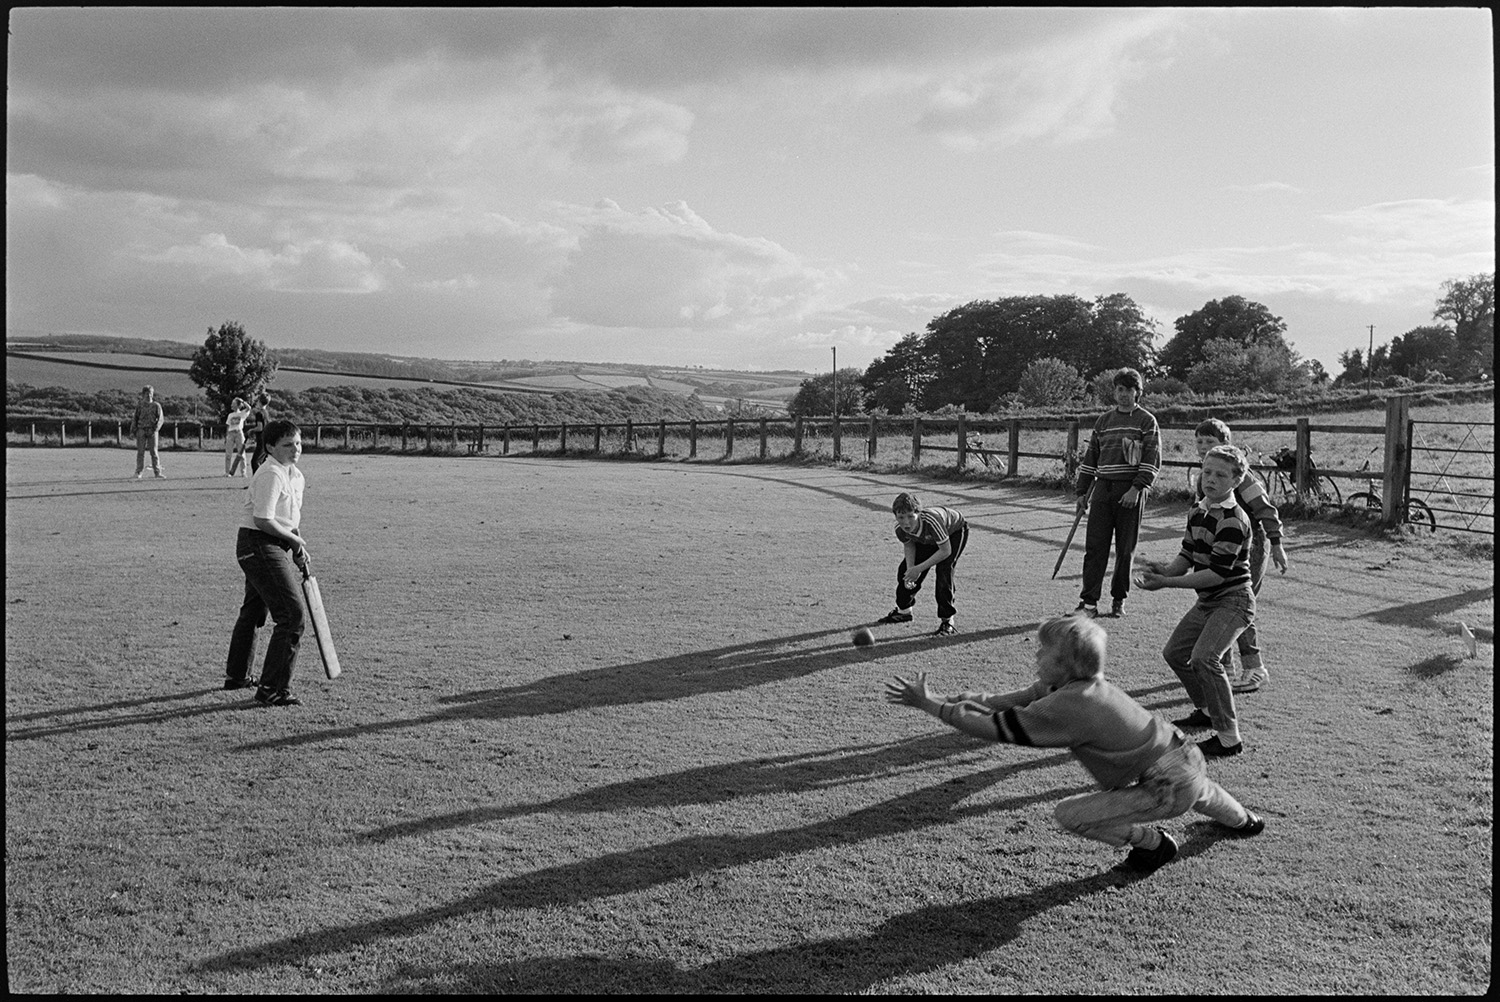 Boys cricket fielding practice on village cricket pitch with sun and clouds.
[A group of five boys at cricket practice, with one boy holding a bat and one boy diving to catch the ball. They are being coached by Mr Parker on the Chulmleigh village cricket field. A view of the surrounding countryside of fields and hedgerows is visible in the background along with clouds in the sky.]